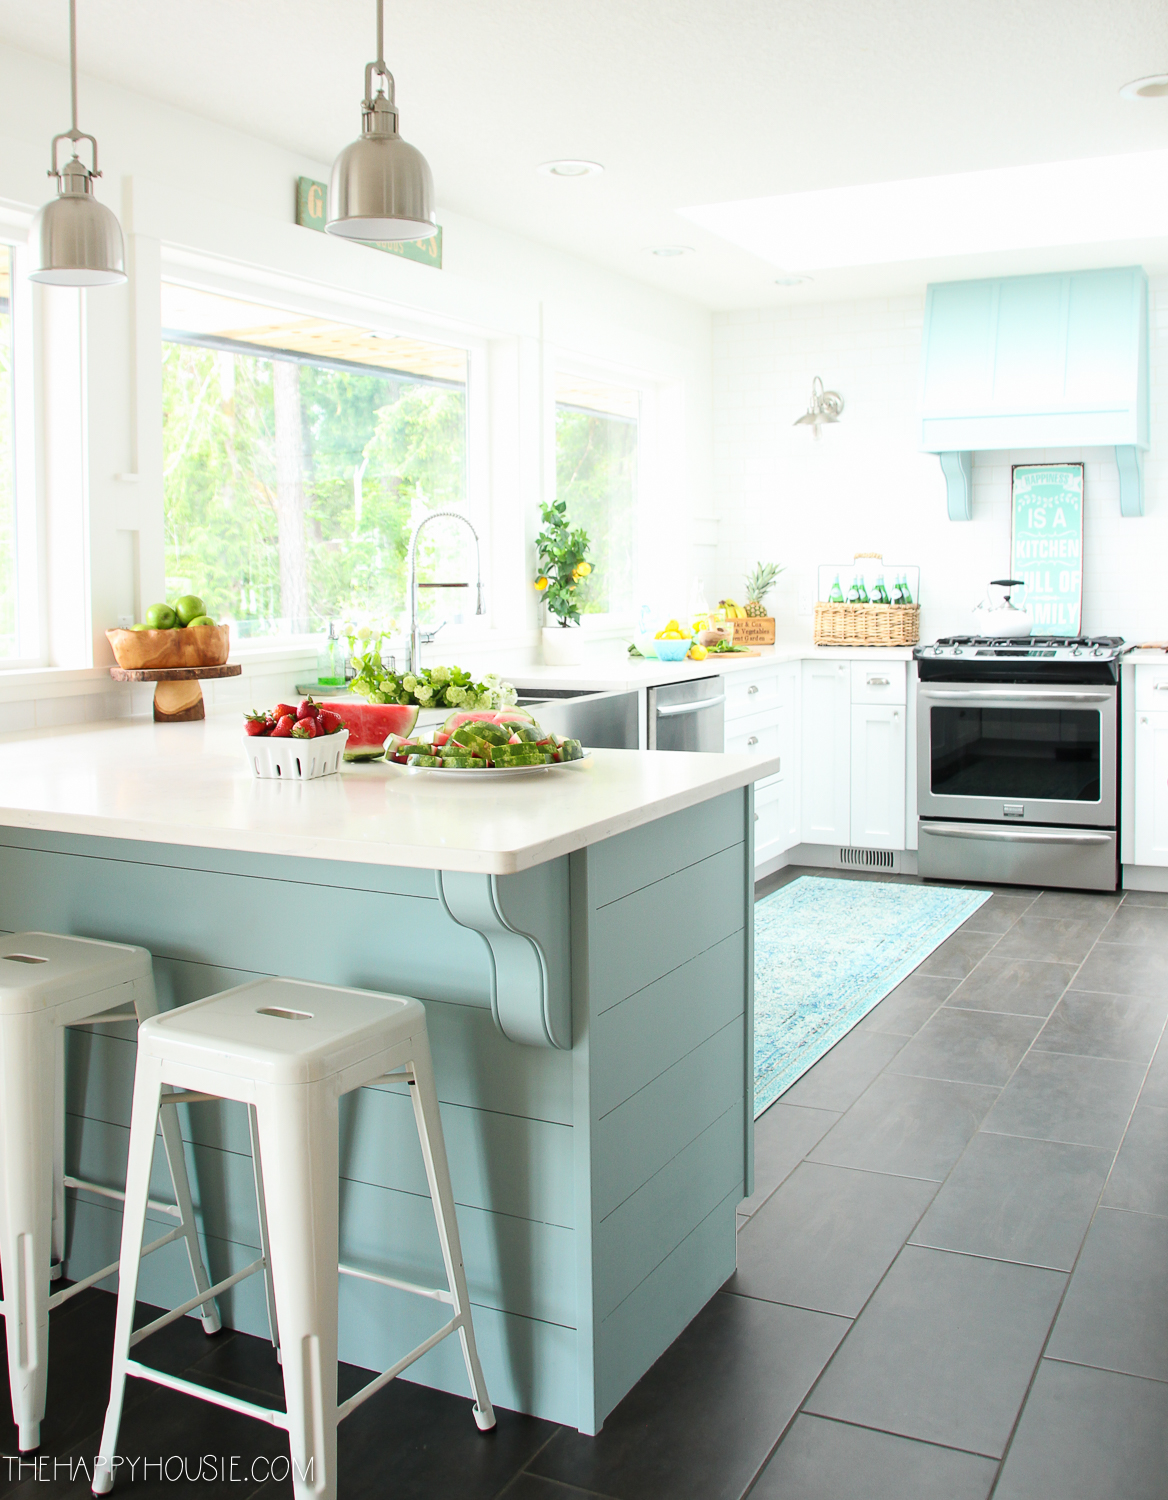 A white and blue kitchen with stools at a small island.